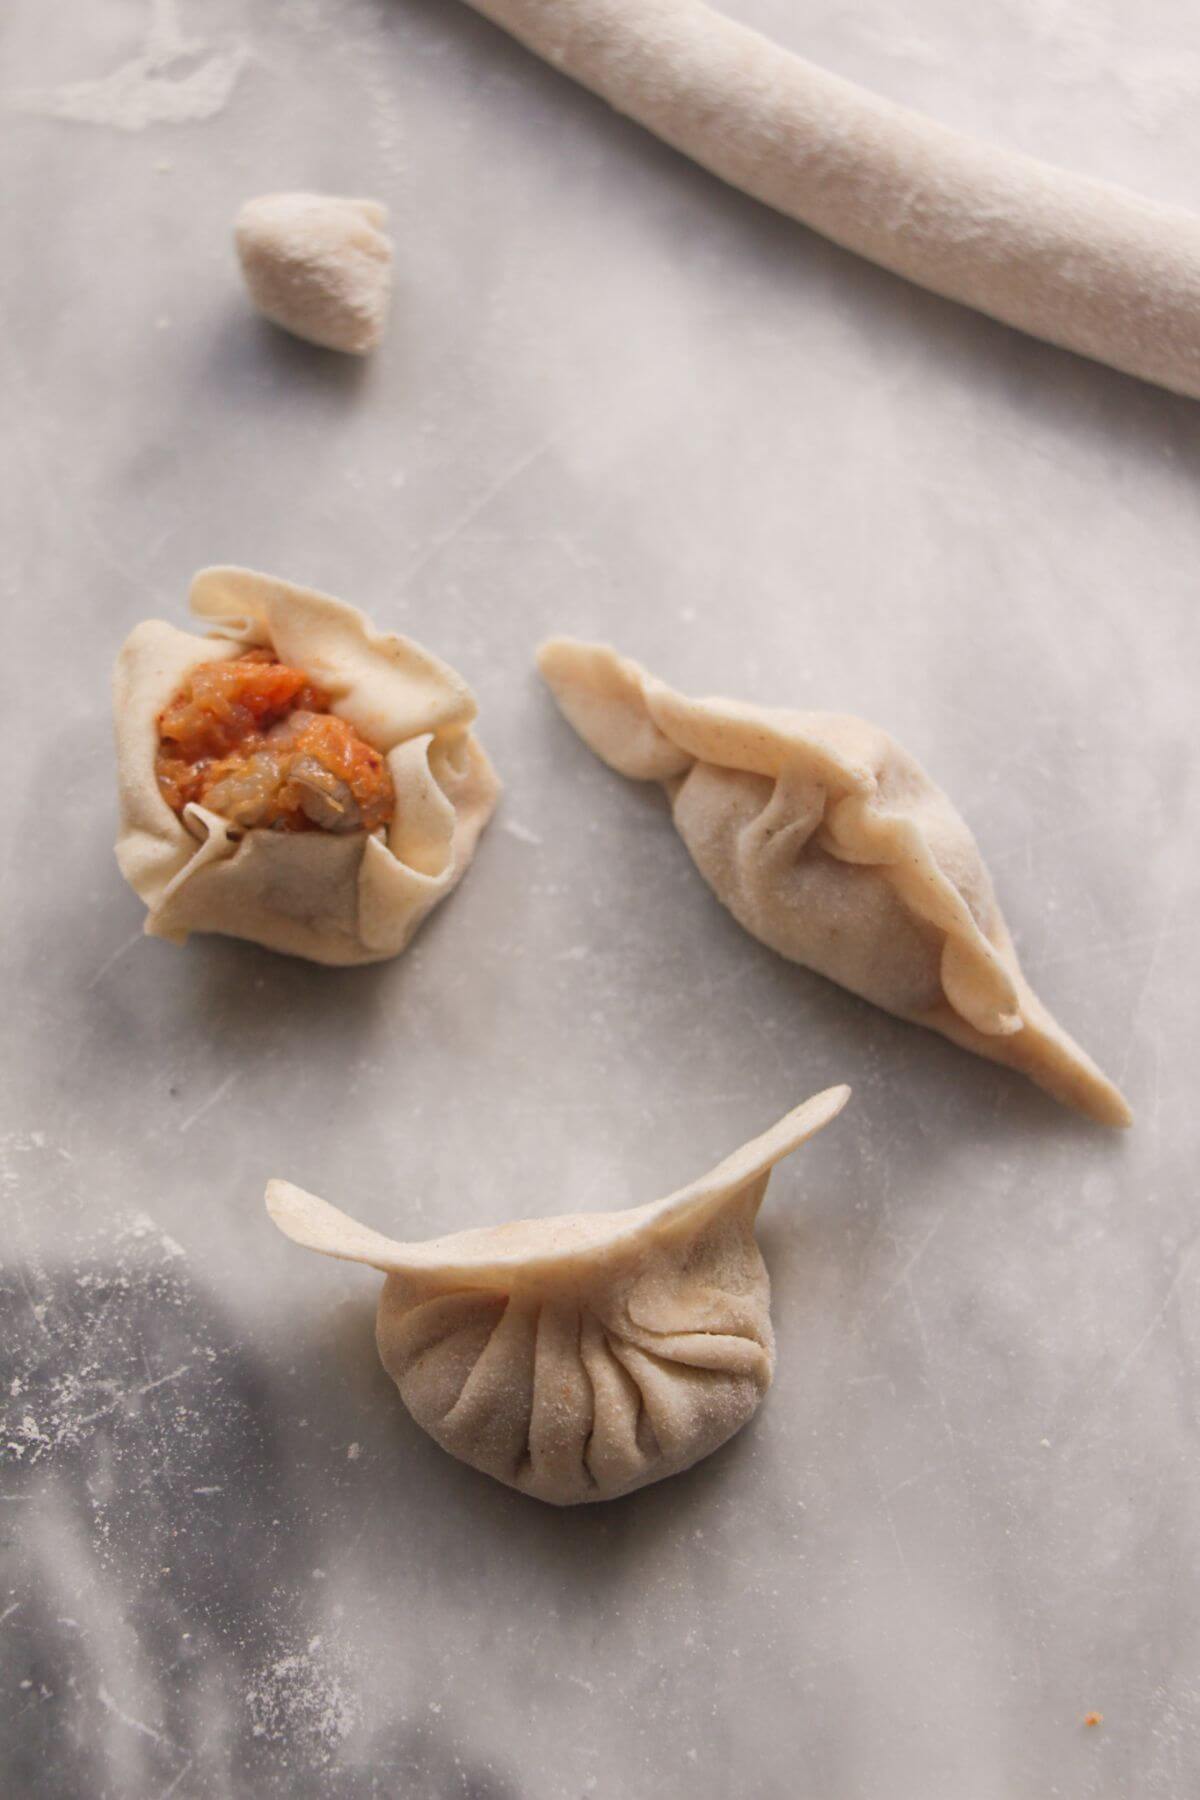 Three different styles of folded dumplings on a marble background.